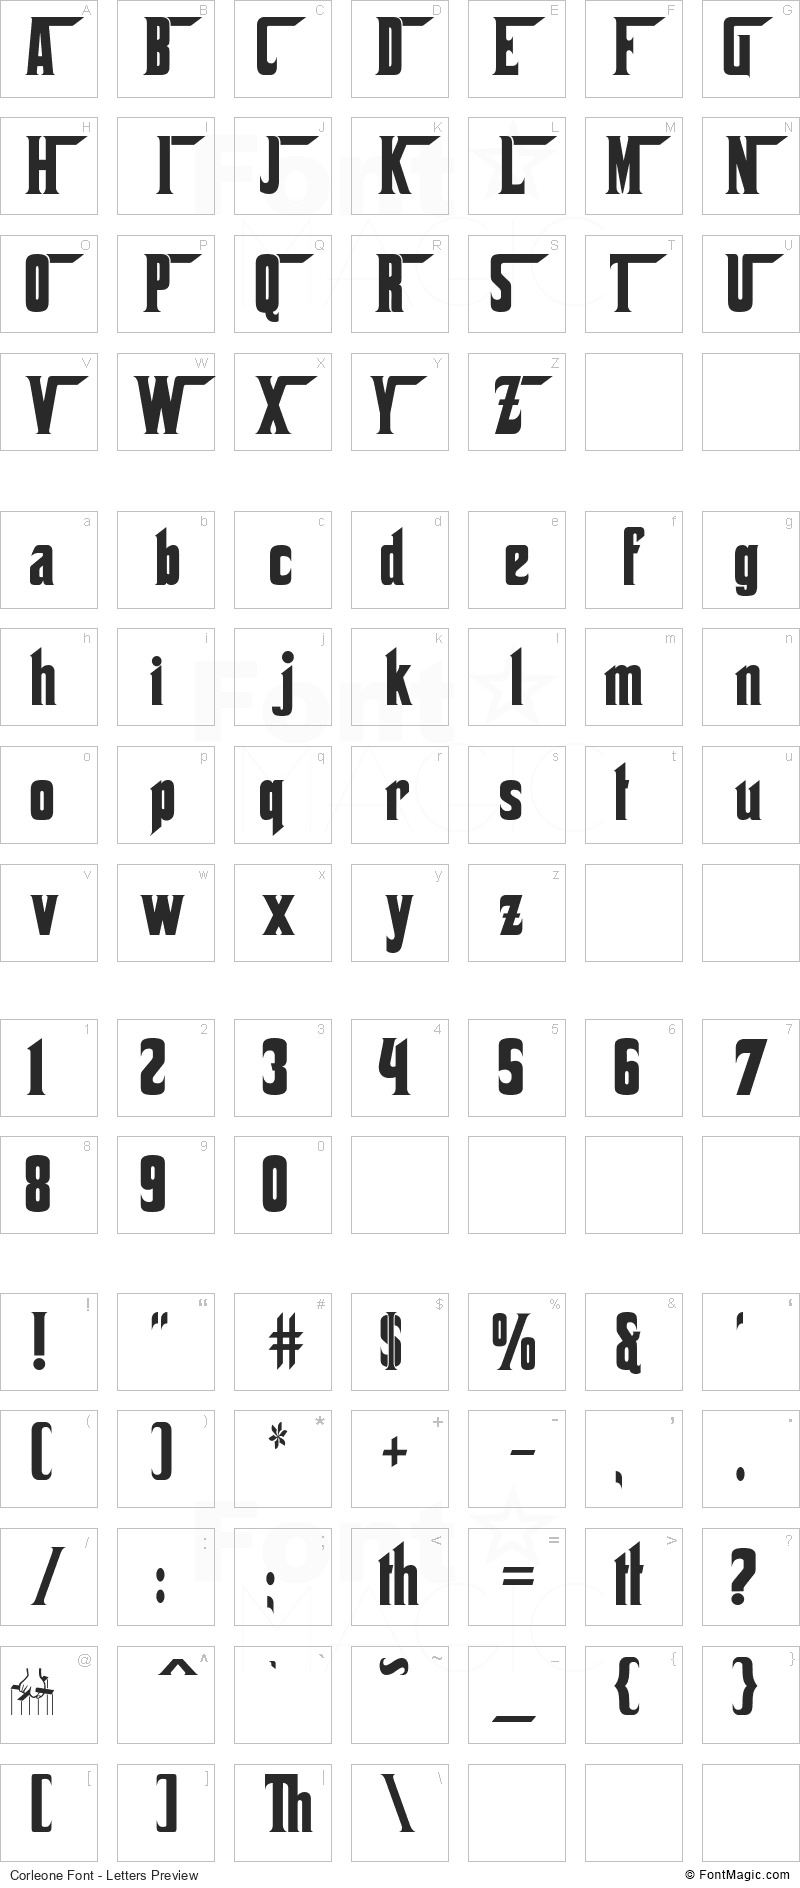 Corleone Font - All Latters Preview Chart